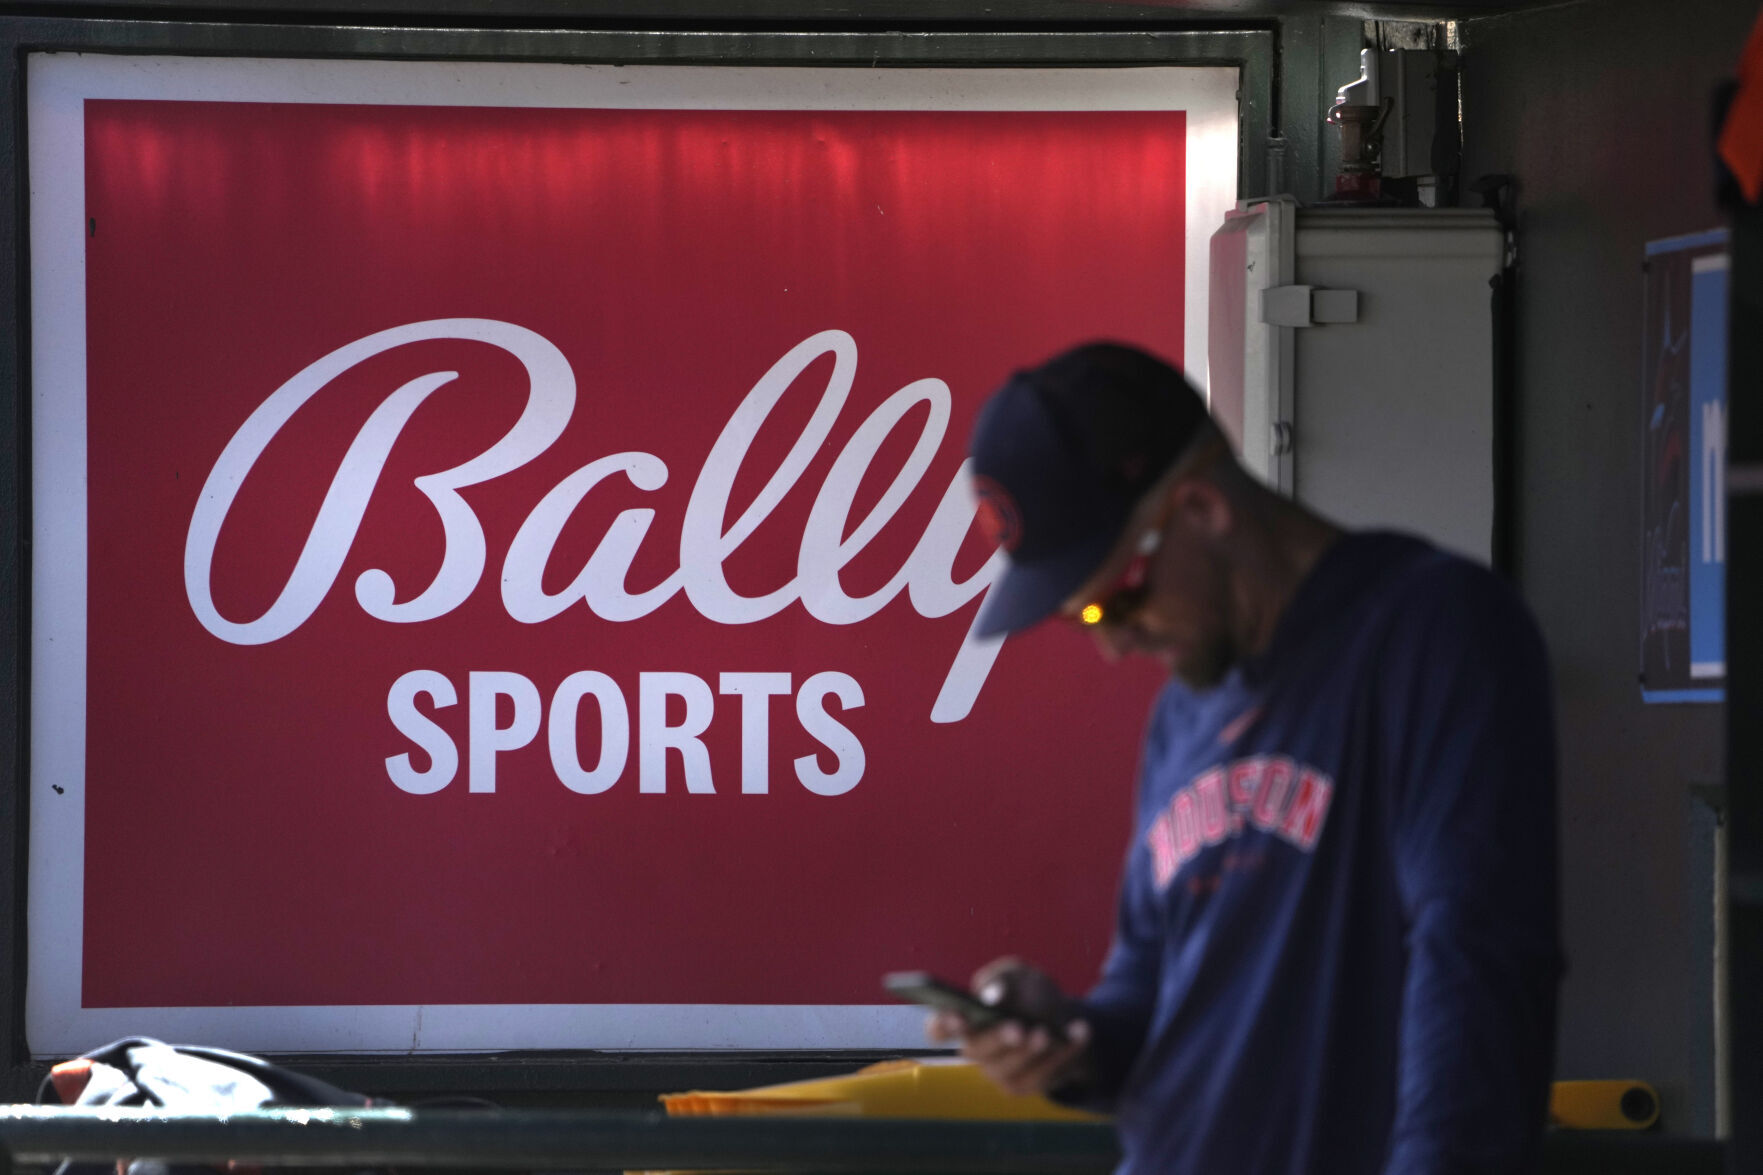 Diamond Sports, owner of Cardinals and Blues broadcast partner Ballys, files for bankruptcy